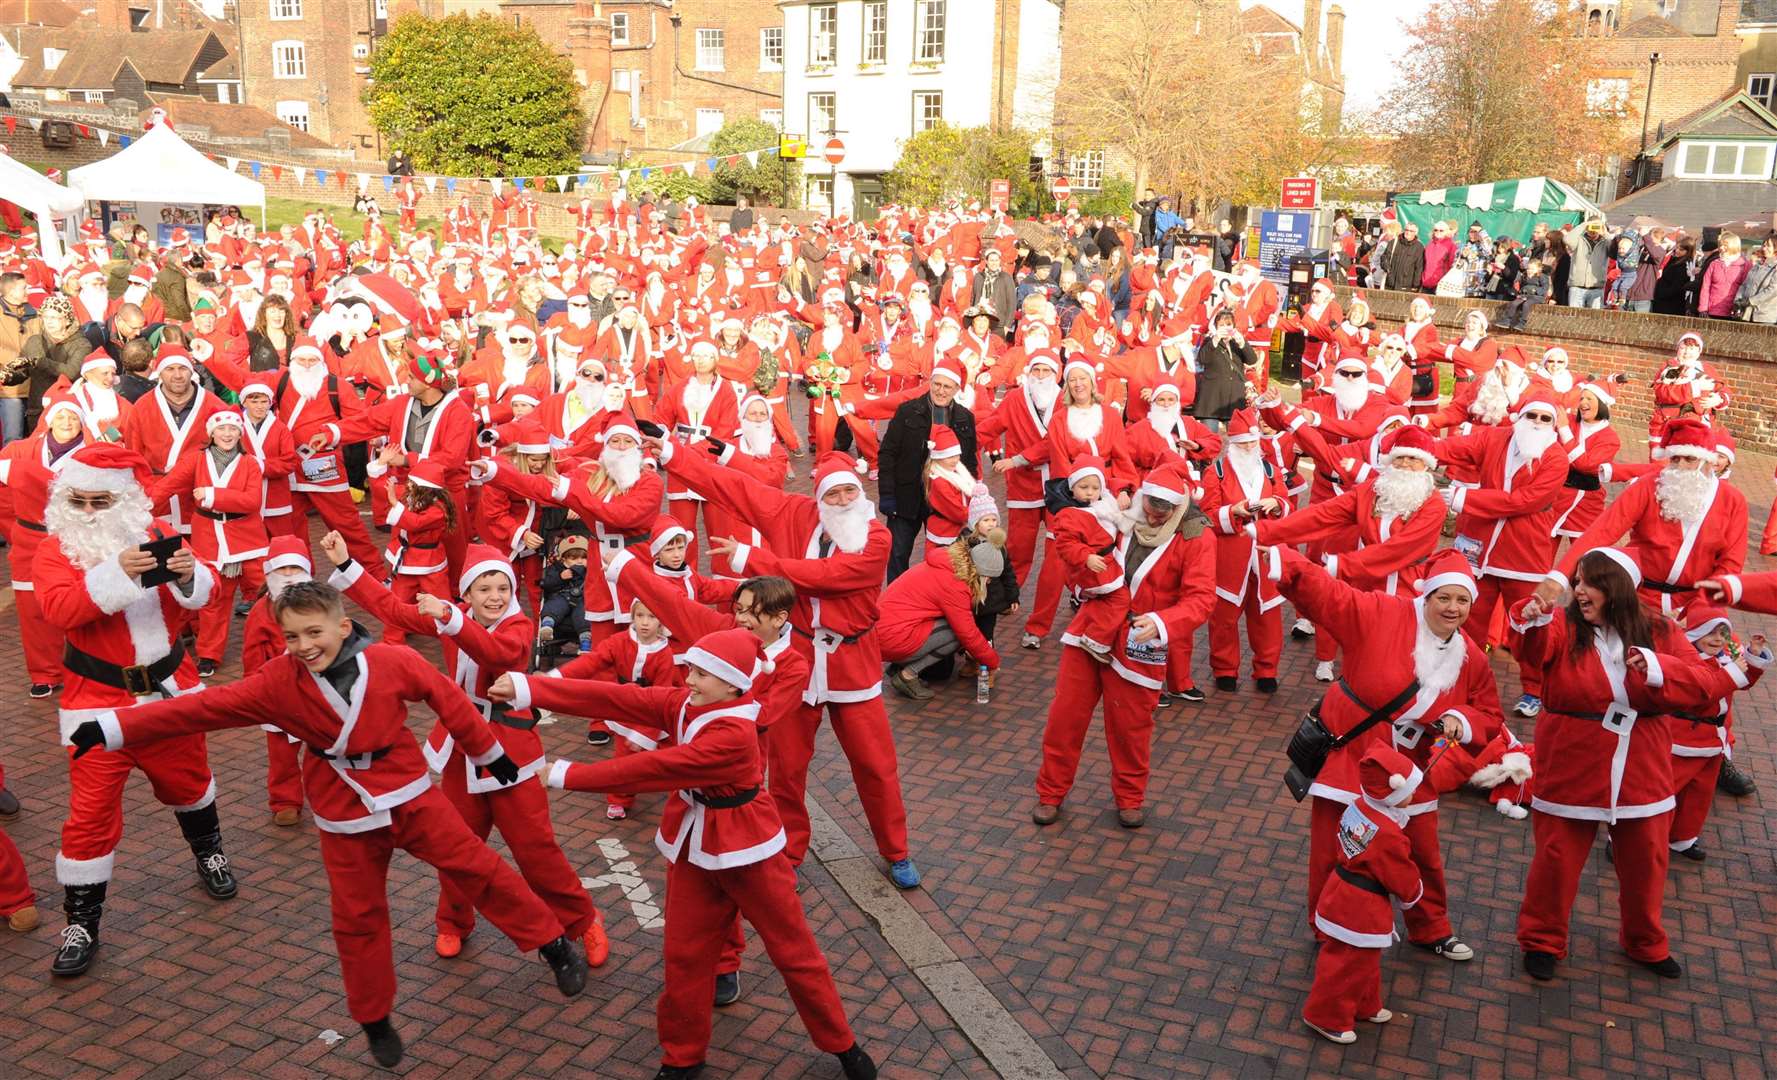 There'll be a sea of red and white for the Medway Rotary Santa Fun Run Picture: Steve Crispe